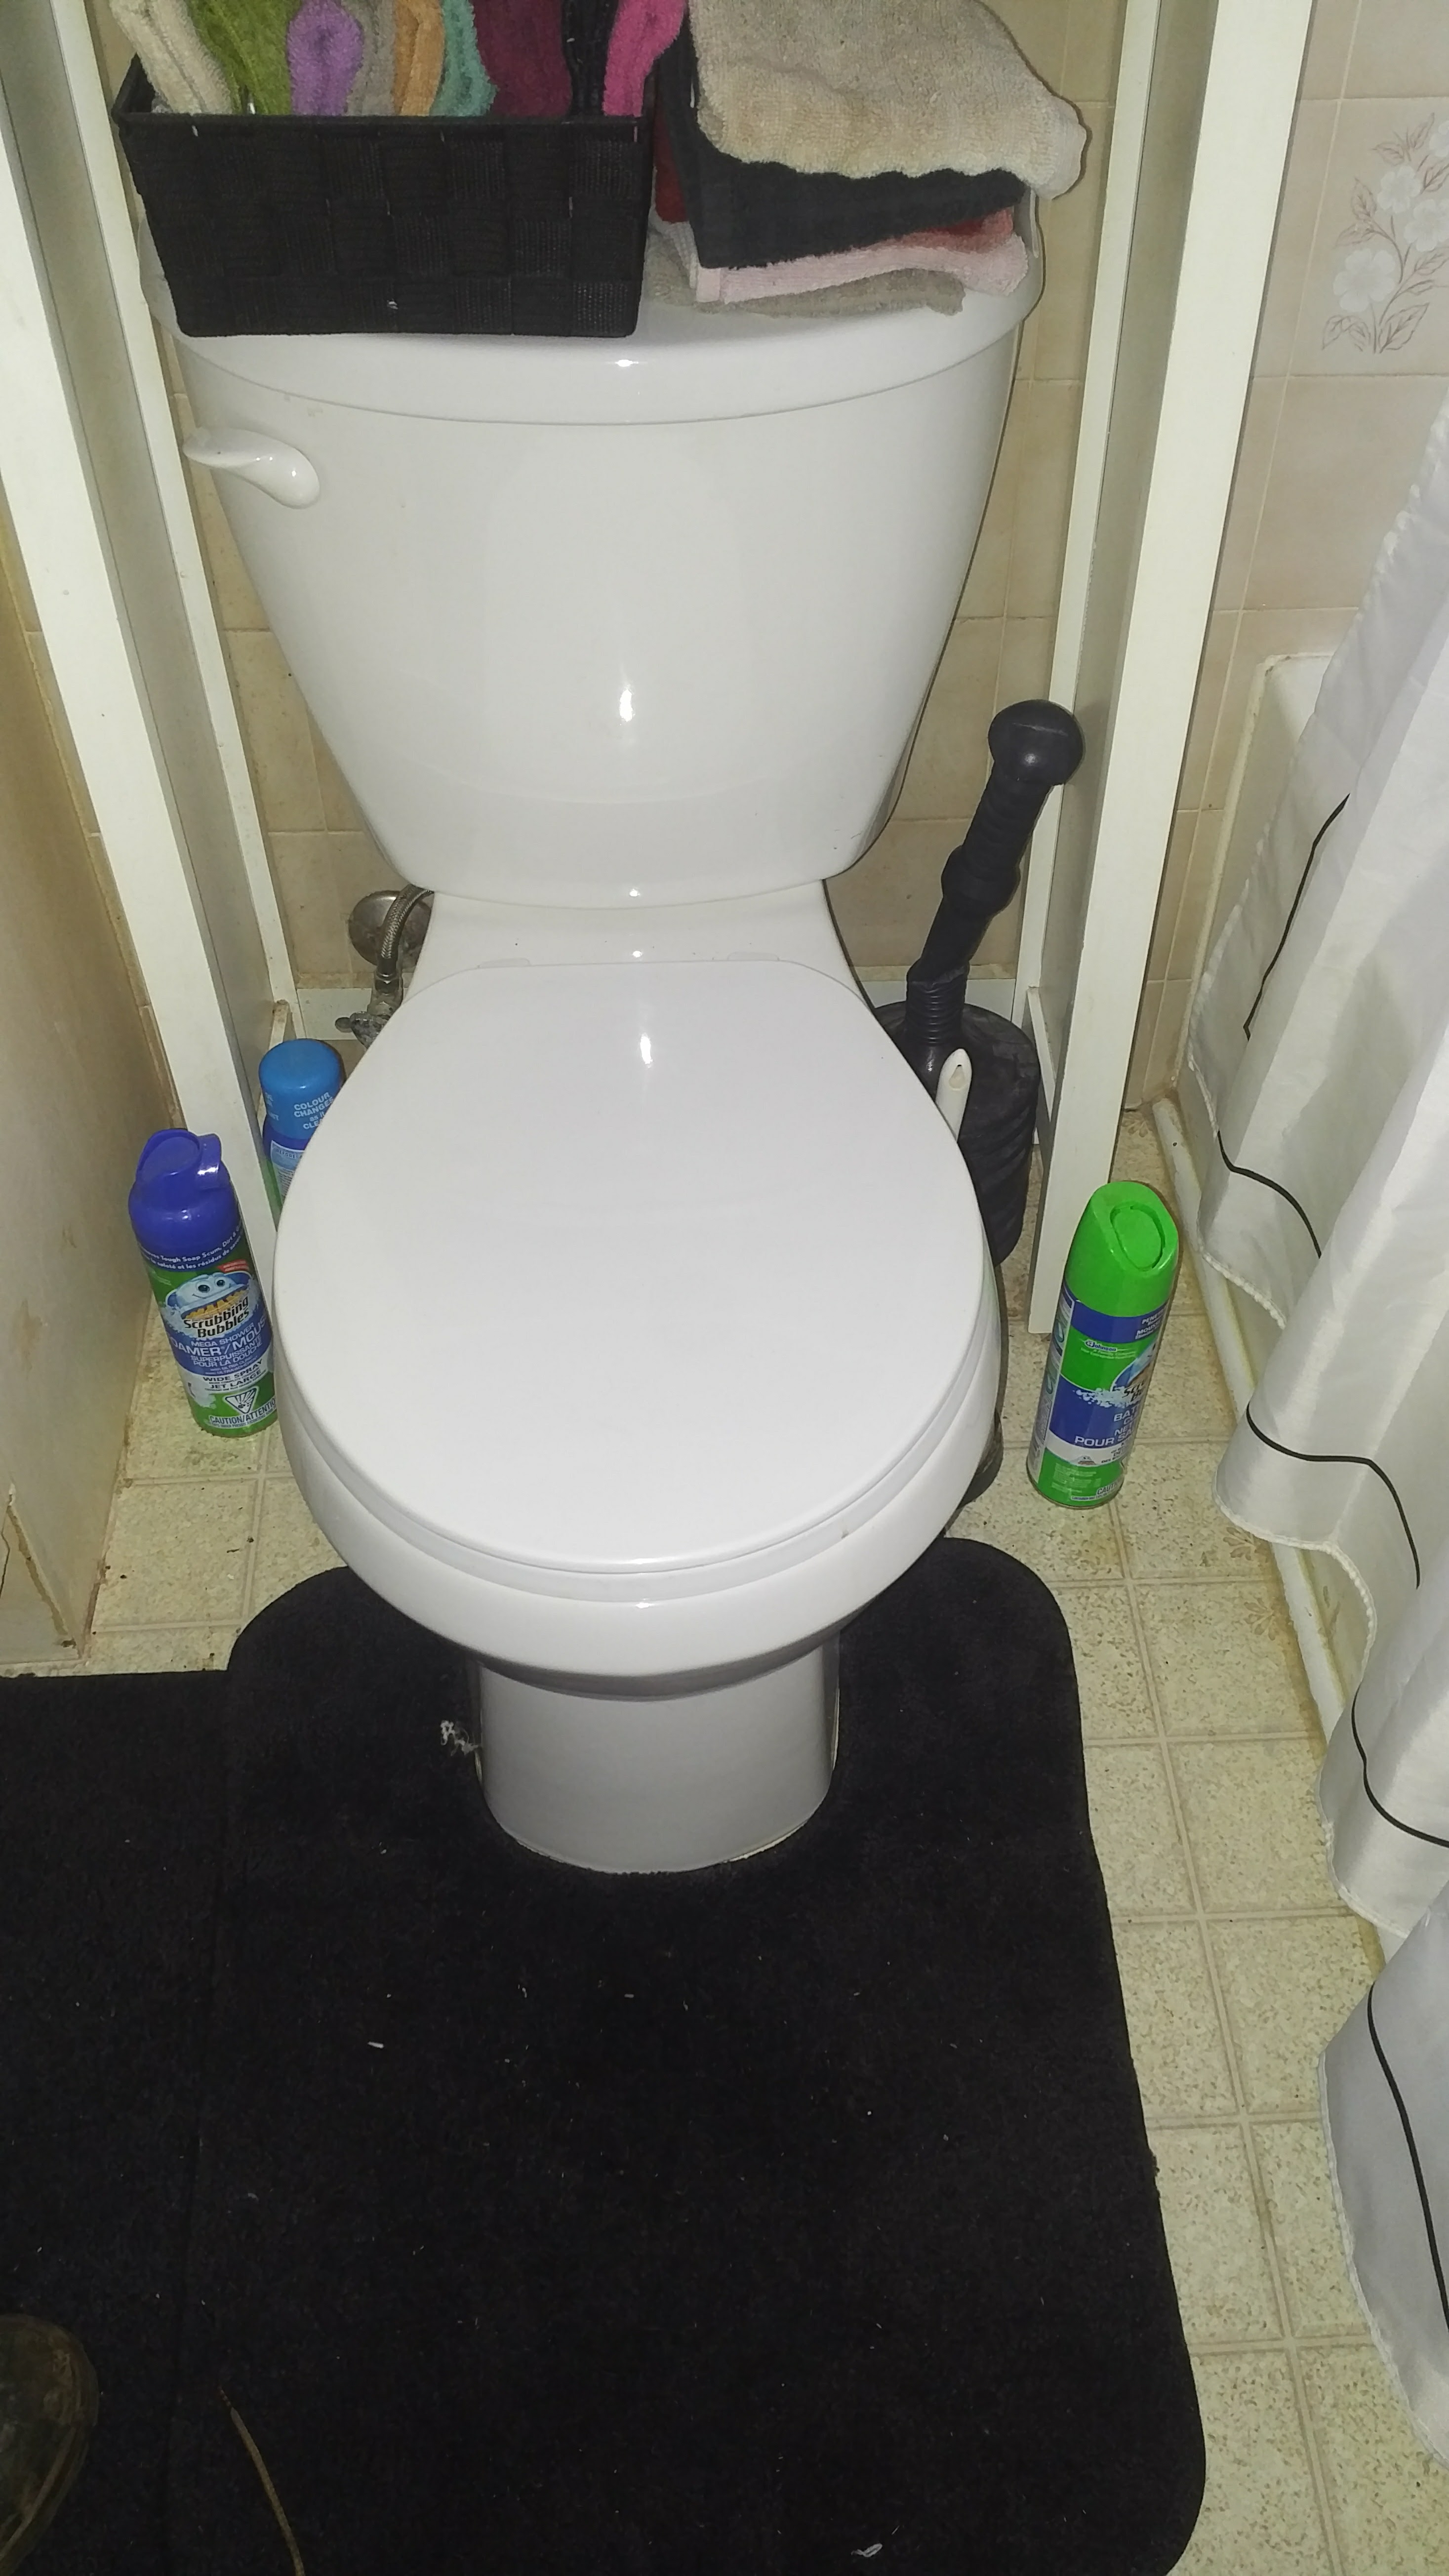 Handyman Rotted Floor Under Toilet After